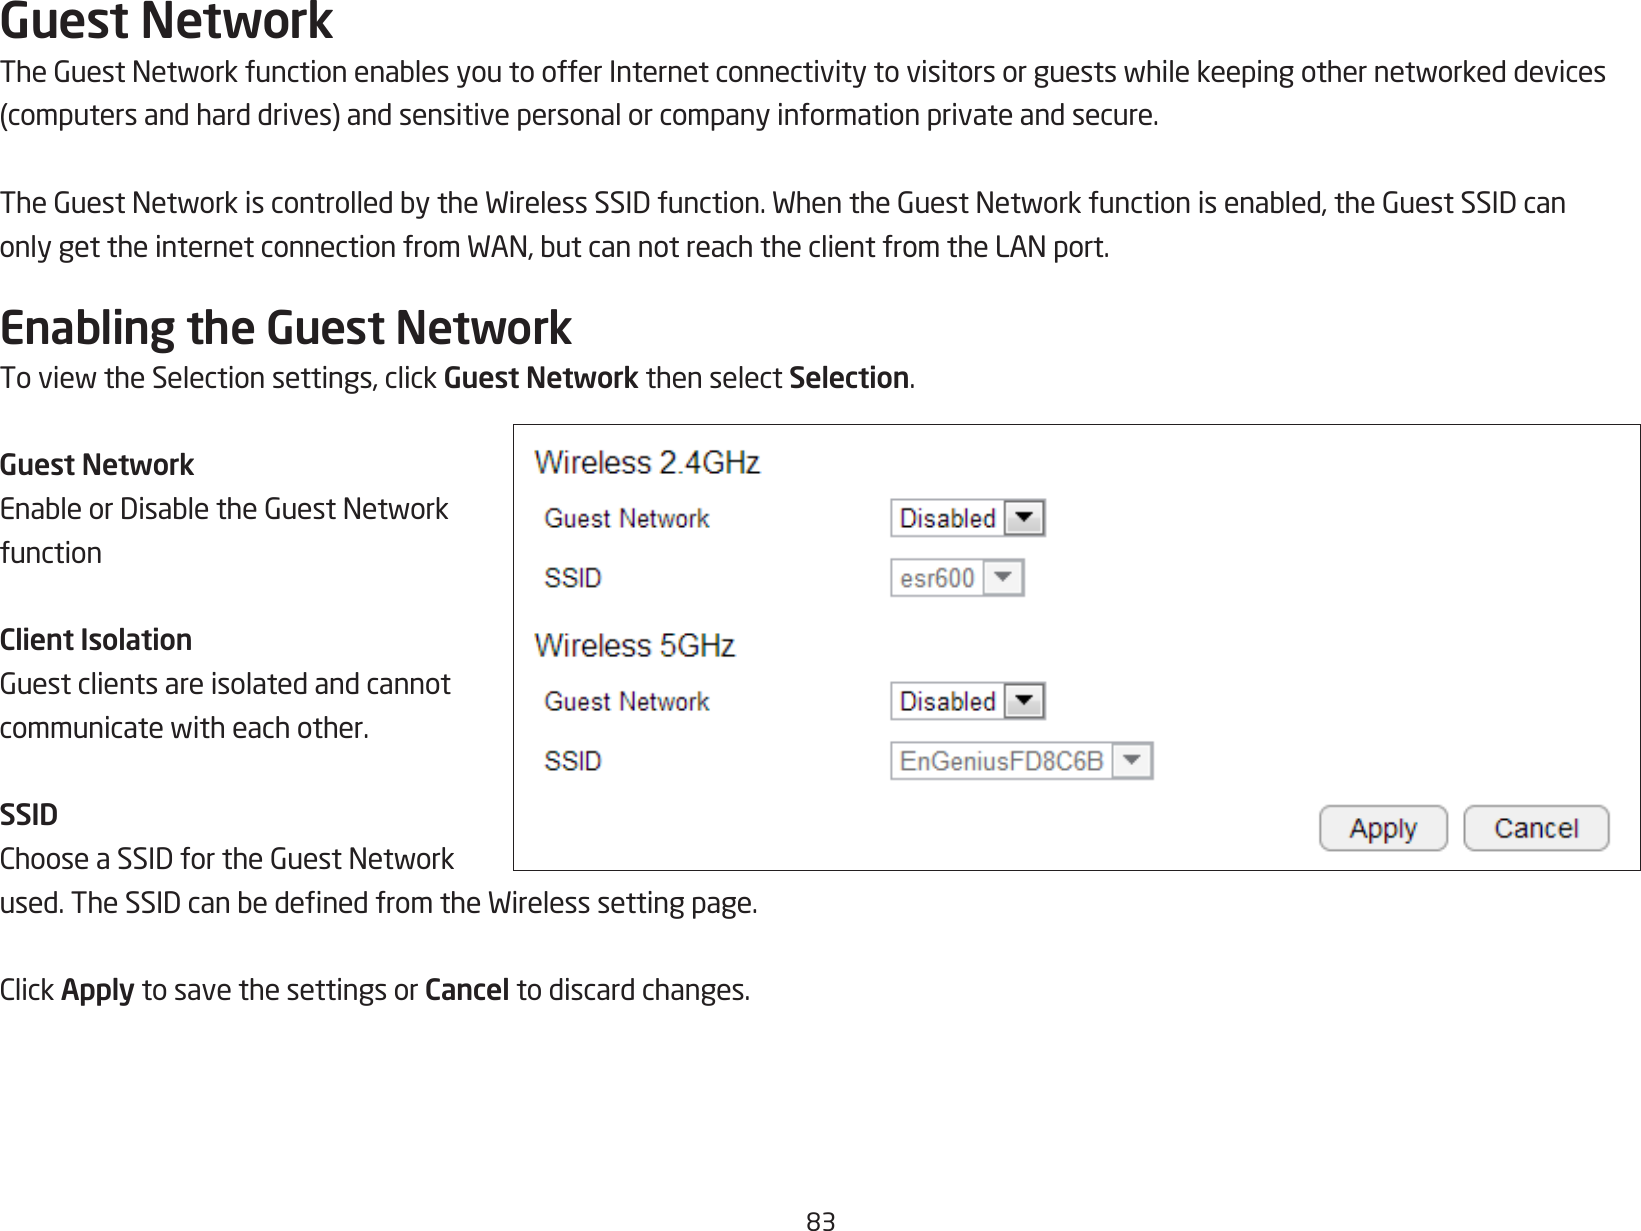 83Guest NetworkTheGuestNetworkfunctionenablesyoutoofferInternetconnectivitytovisitorsorguestswhilekeepingothernetworkeddevices(computersandharddrives)andsensitivepersonalorcompanyinformationprivateandsecure.TheGuestNetworkiscontrolledbytheWirelessSSIDfunction.WhentheGuestNetworkfunctionisenabled,theGuestSSIDcanonlygettheinternetconnectionfromWAN,butcannotreachtheclientfromtheLANport.Enabling the Guest NetworkToviewtheSelectionsettings,clickGuest Network then select Selection.Guest NetworkEnableorDisabletheGuestNetworkfunctionClient IsolationGuestclientsareisolatedandcannotcommunicatewitheachother.SSIDChooseaSSIDfortheGuestNetworkused.TheSSIDcanbedenedfromtheWirelesssettingpage.ClickApply to save the settings or Cancel to discard changes.